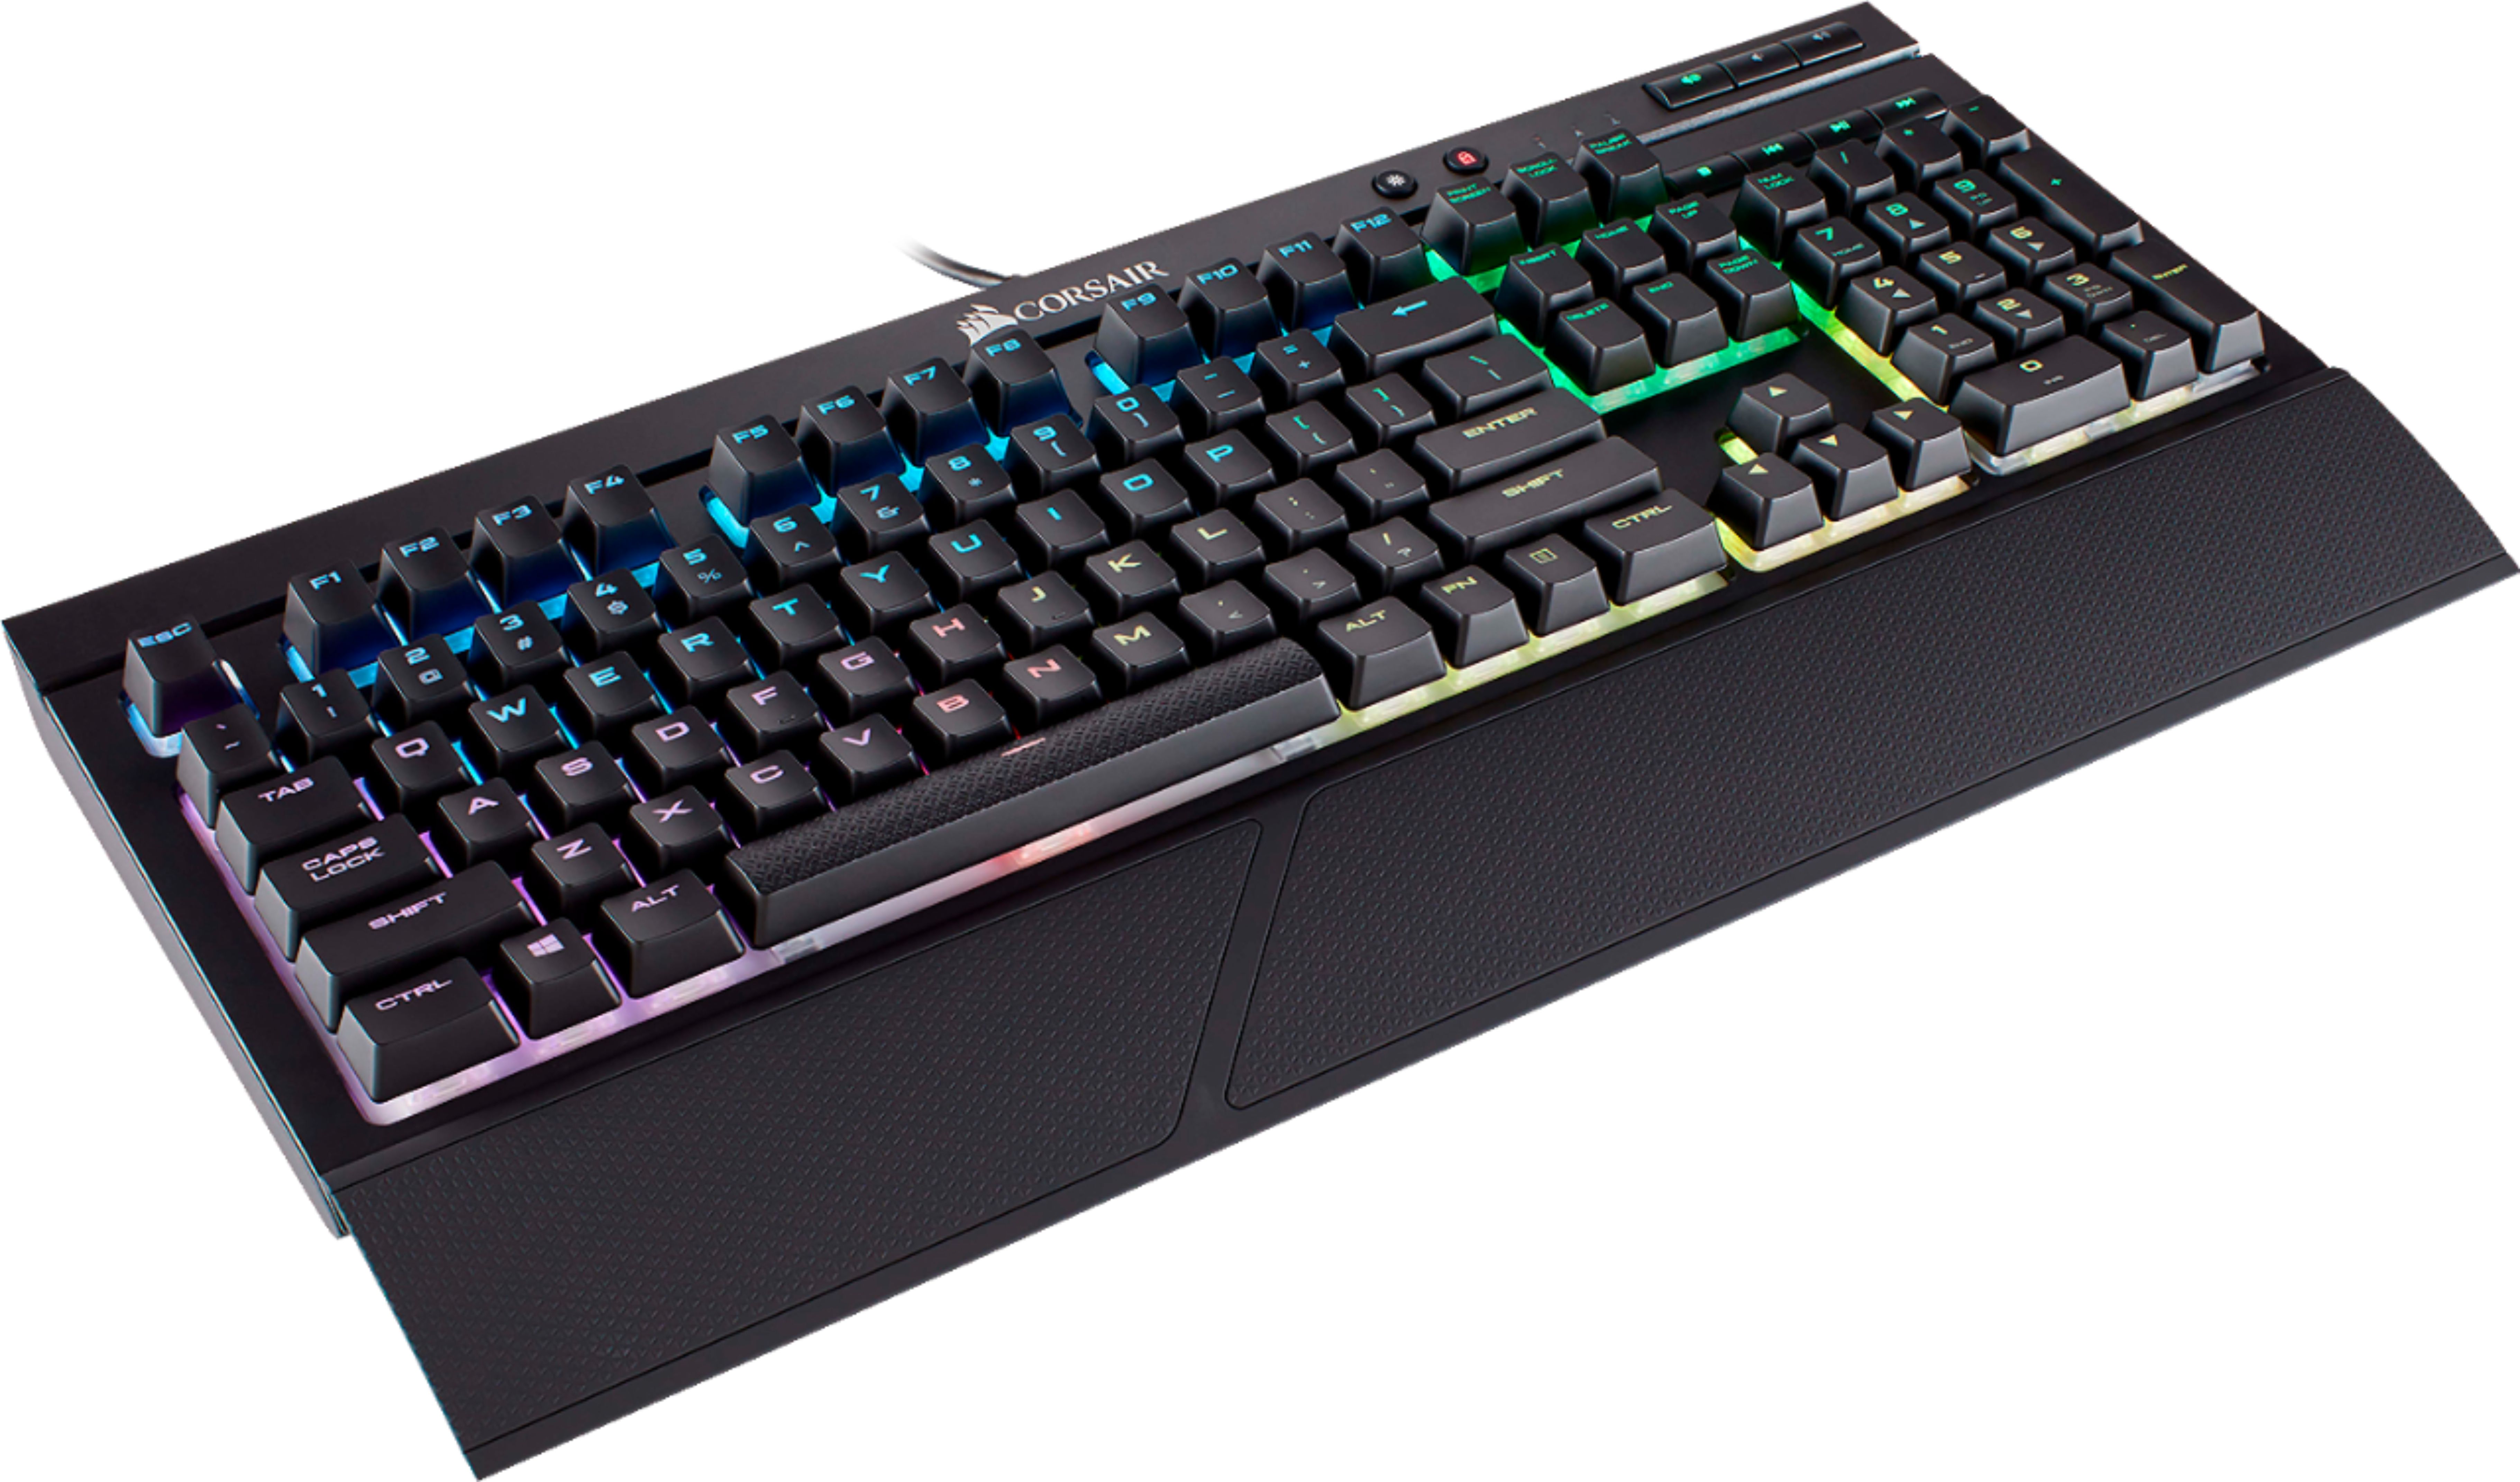 K68 Wired Gaming Mechanical Cherry MX Red Switch Keyboard with RGB Backlighting Black - Best